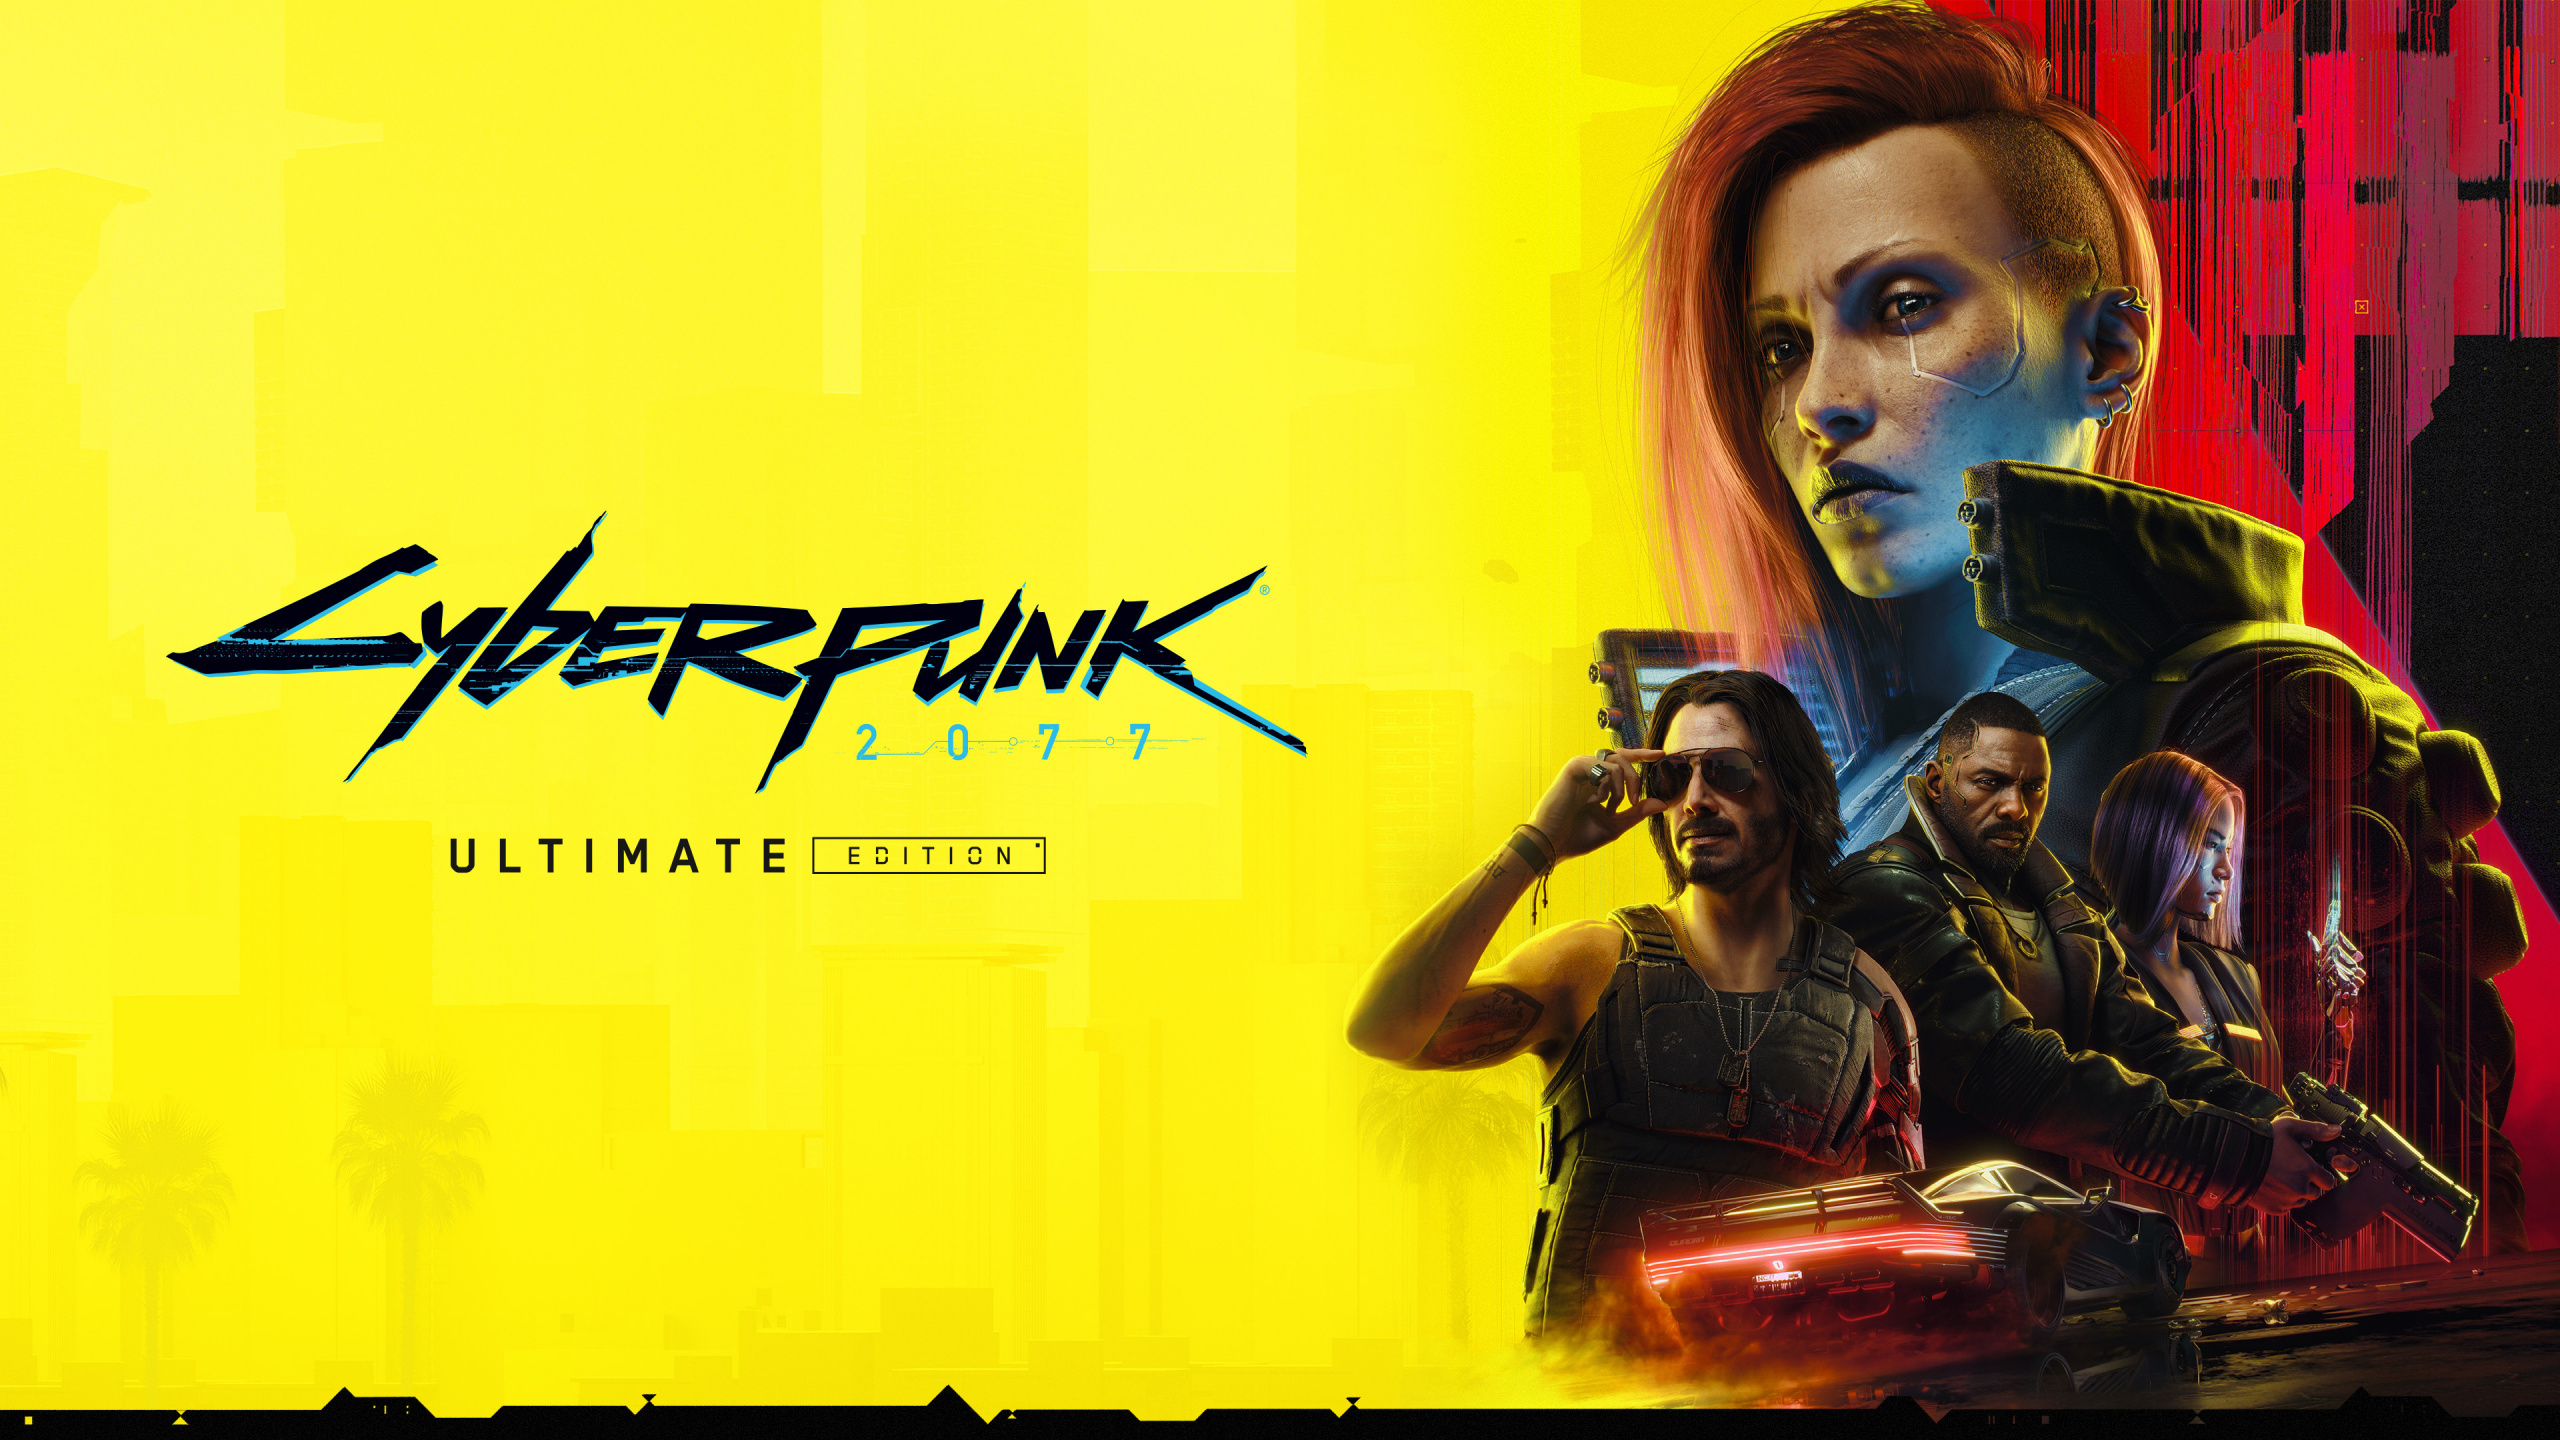 Cyberpunk 2077: Ultimate Edition and Update 2.1 Available Today